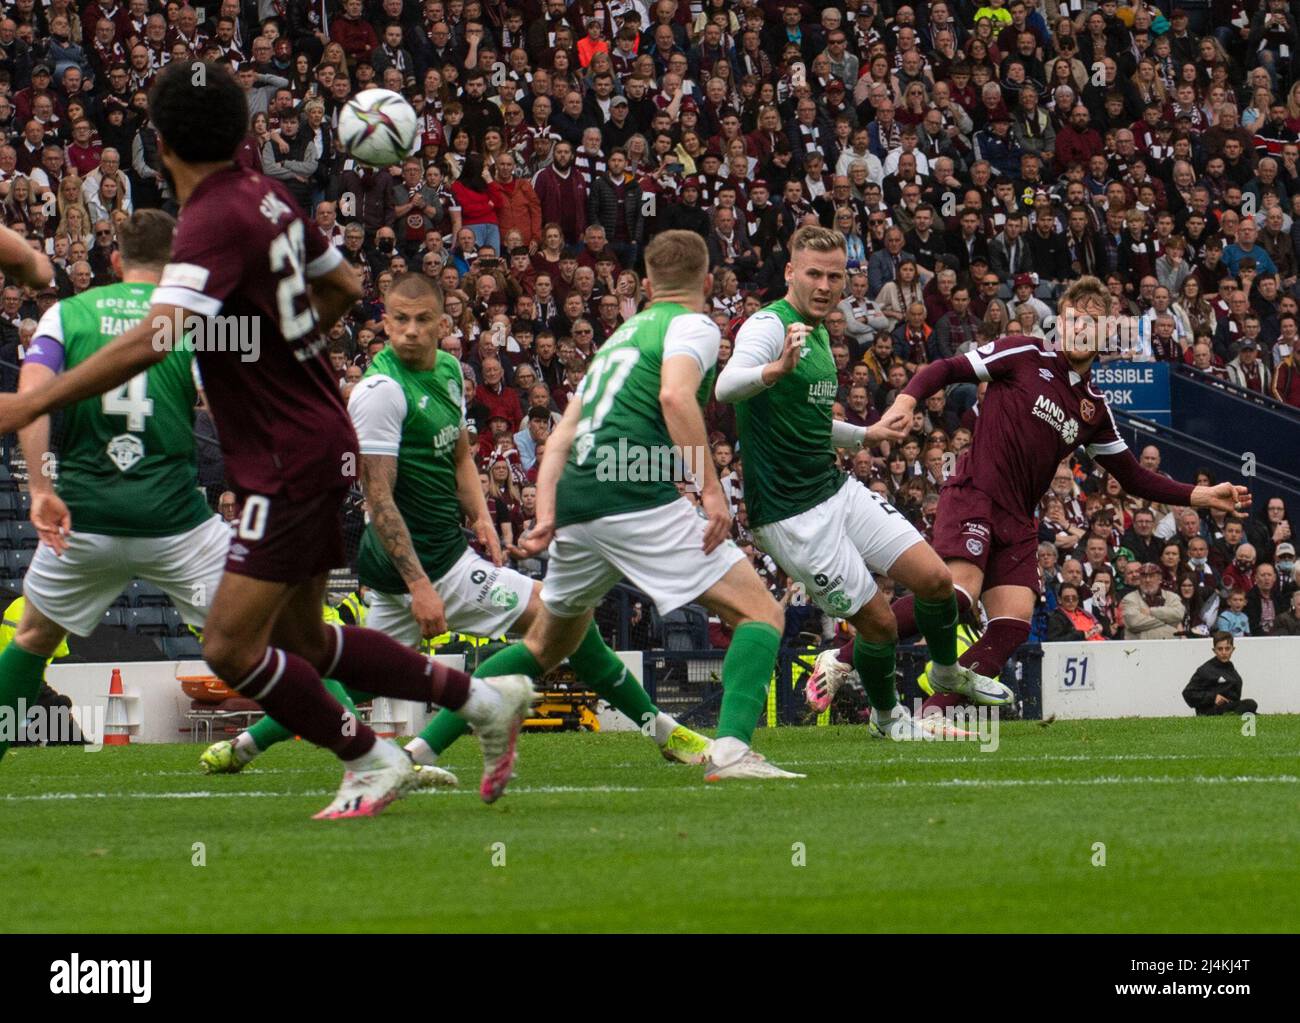 Glasgow, UK. 16th Apr, 2022. Scottish Cup Semi-Final - Heart of Midlothian FC v Hibernian FC 16/04/2022 Pic shows: Hearts' left-back, Stephen Kingsley, fires home what proved to be the winning goal as Hearts take on Hibs in the Scottish Cup semi final at Hampden Park, Glasgow Credit: Ian Jacobs/Alamy Live News Stock Photo